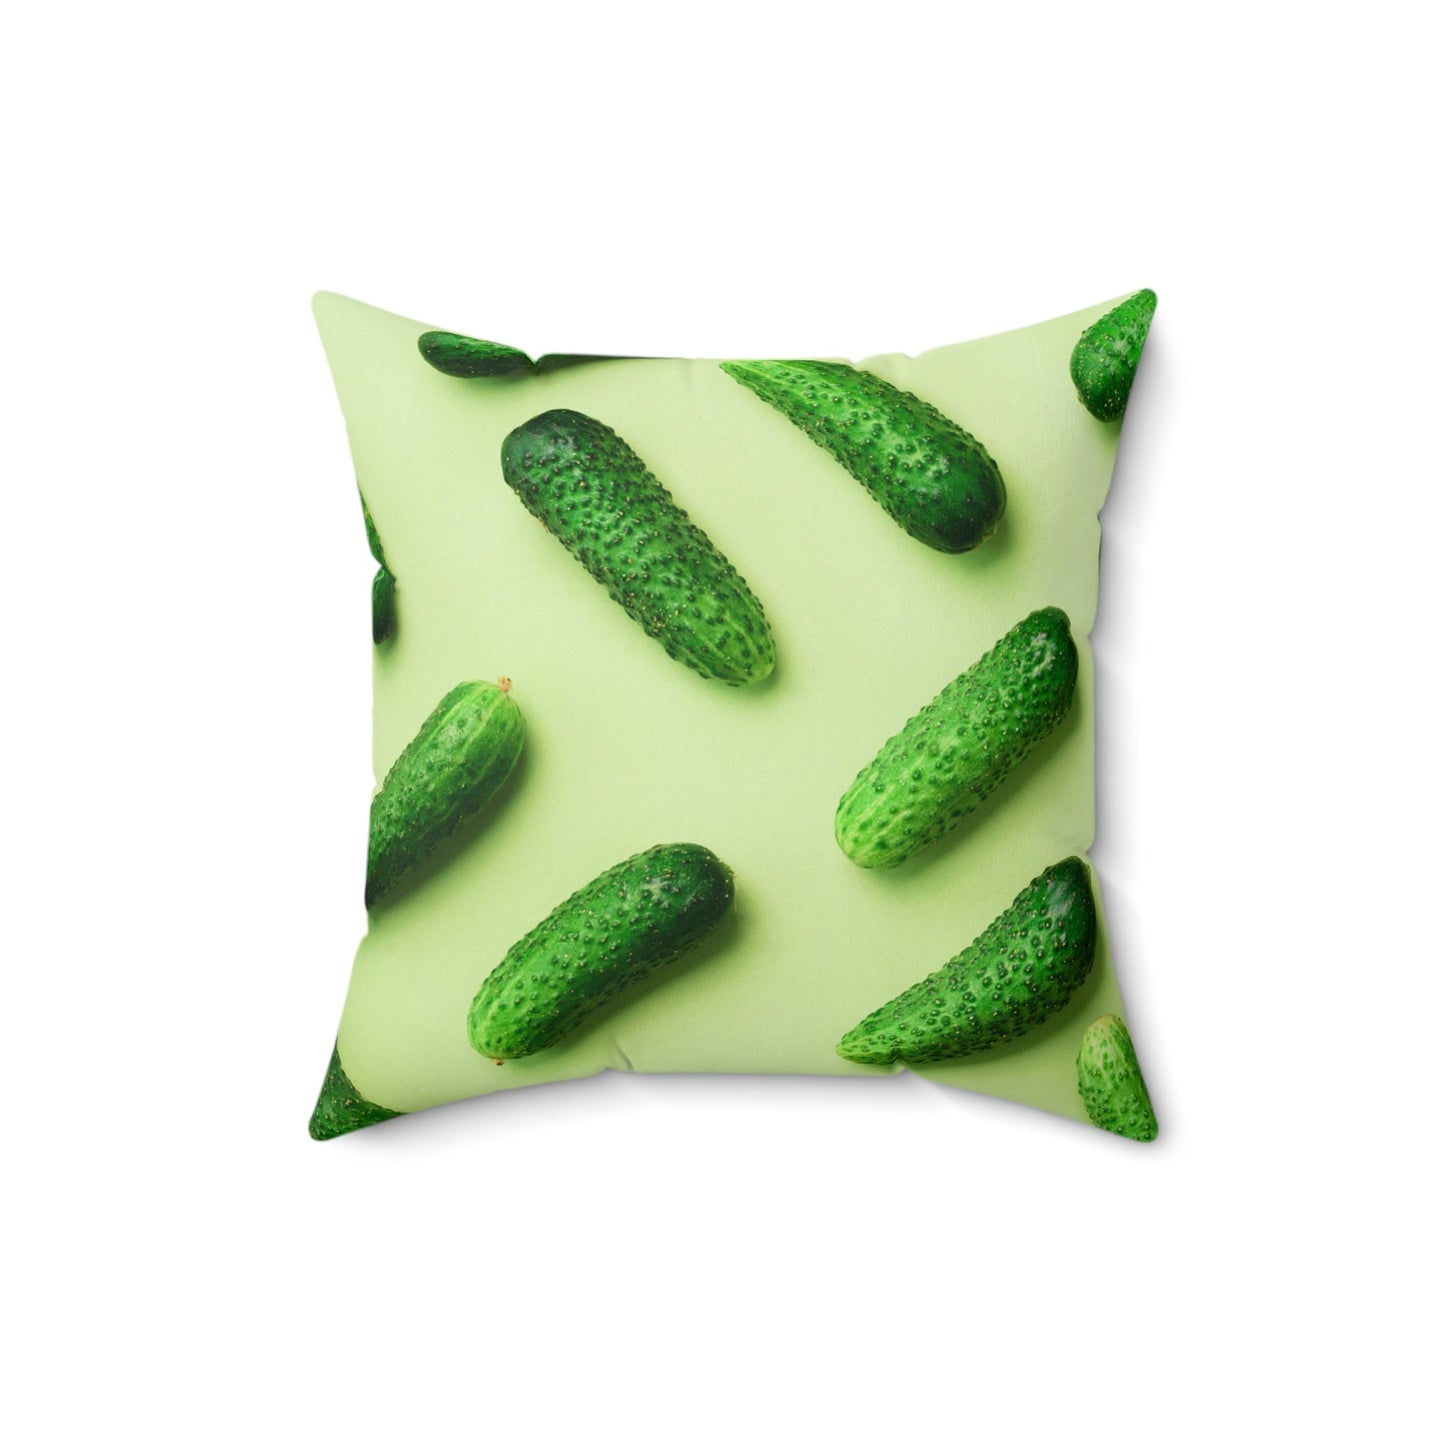 You're In a Pickle Square Pillow Home Decor Pink Sweetheart